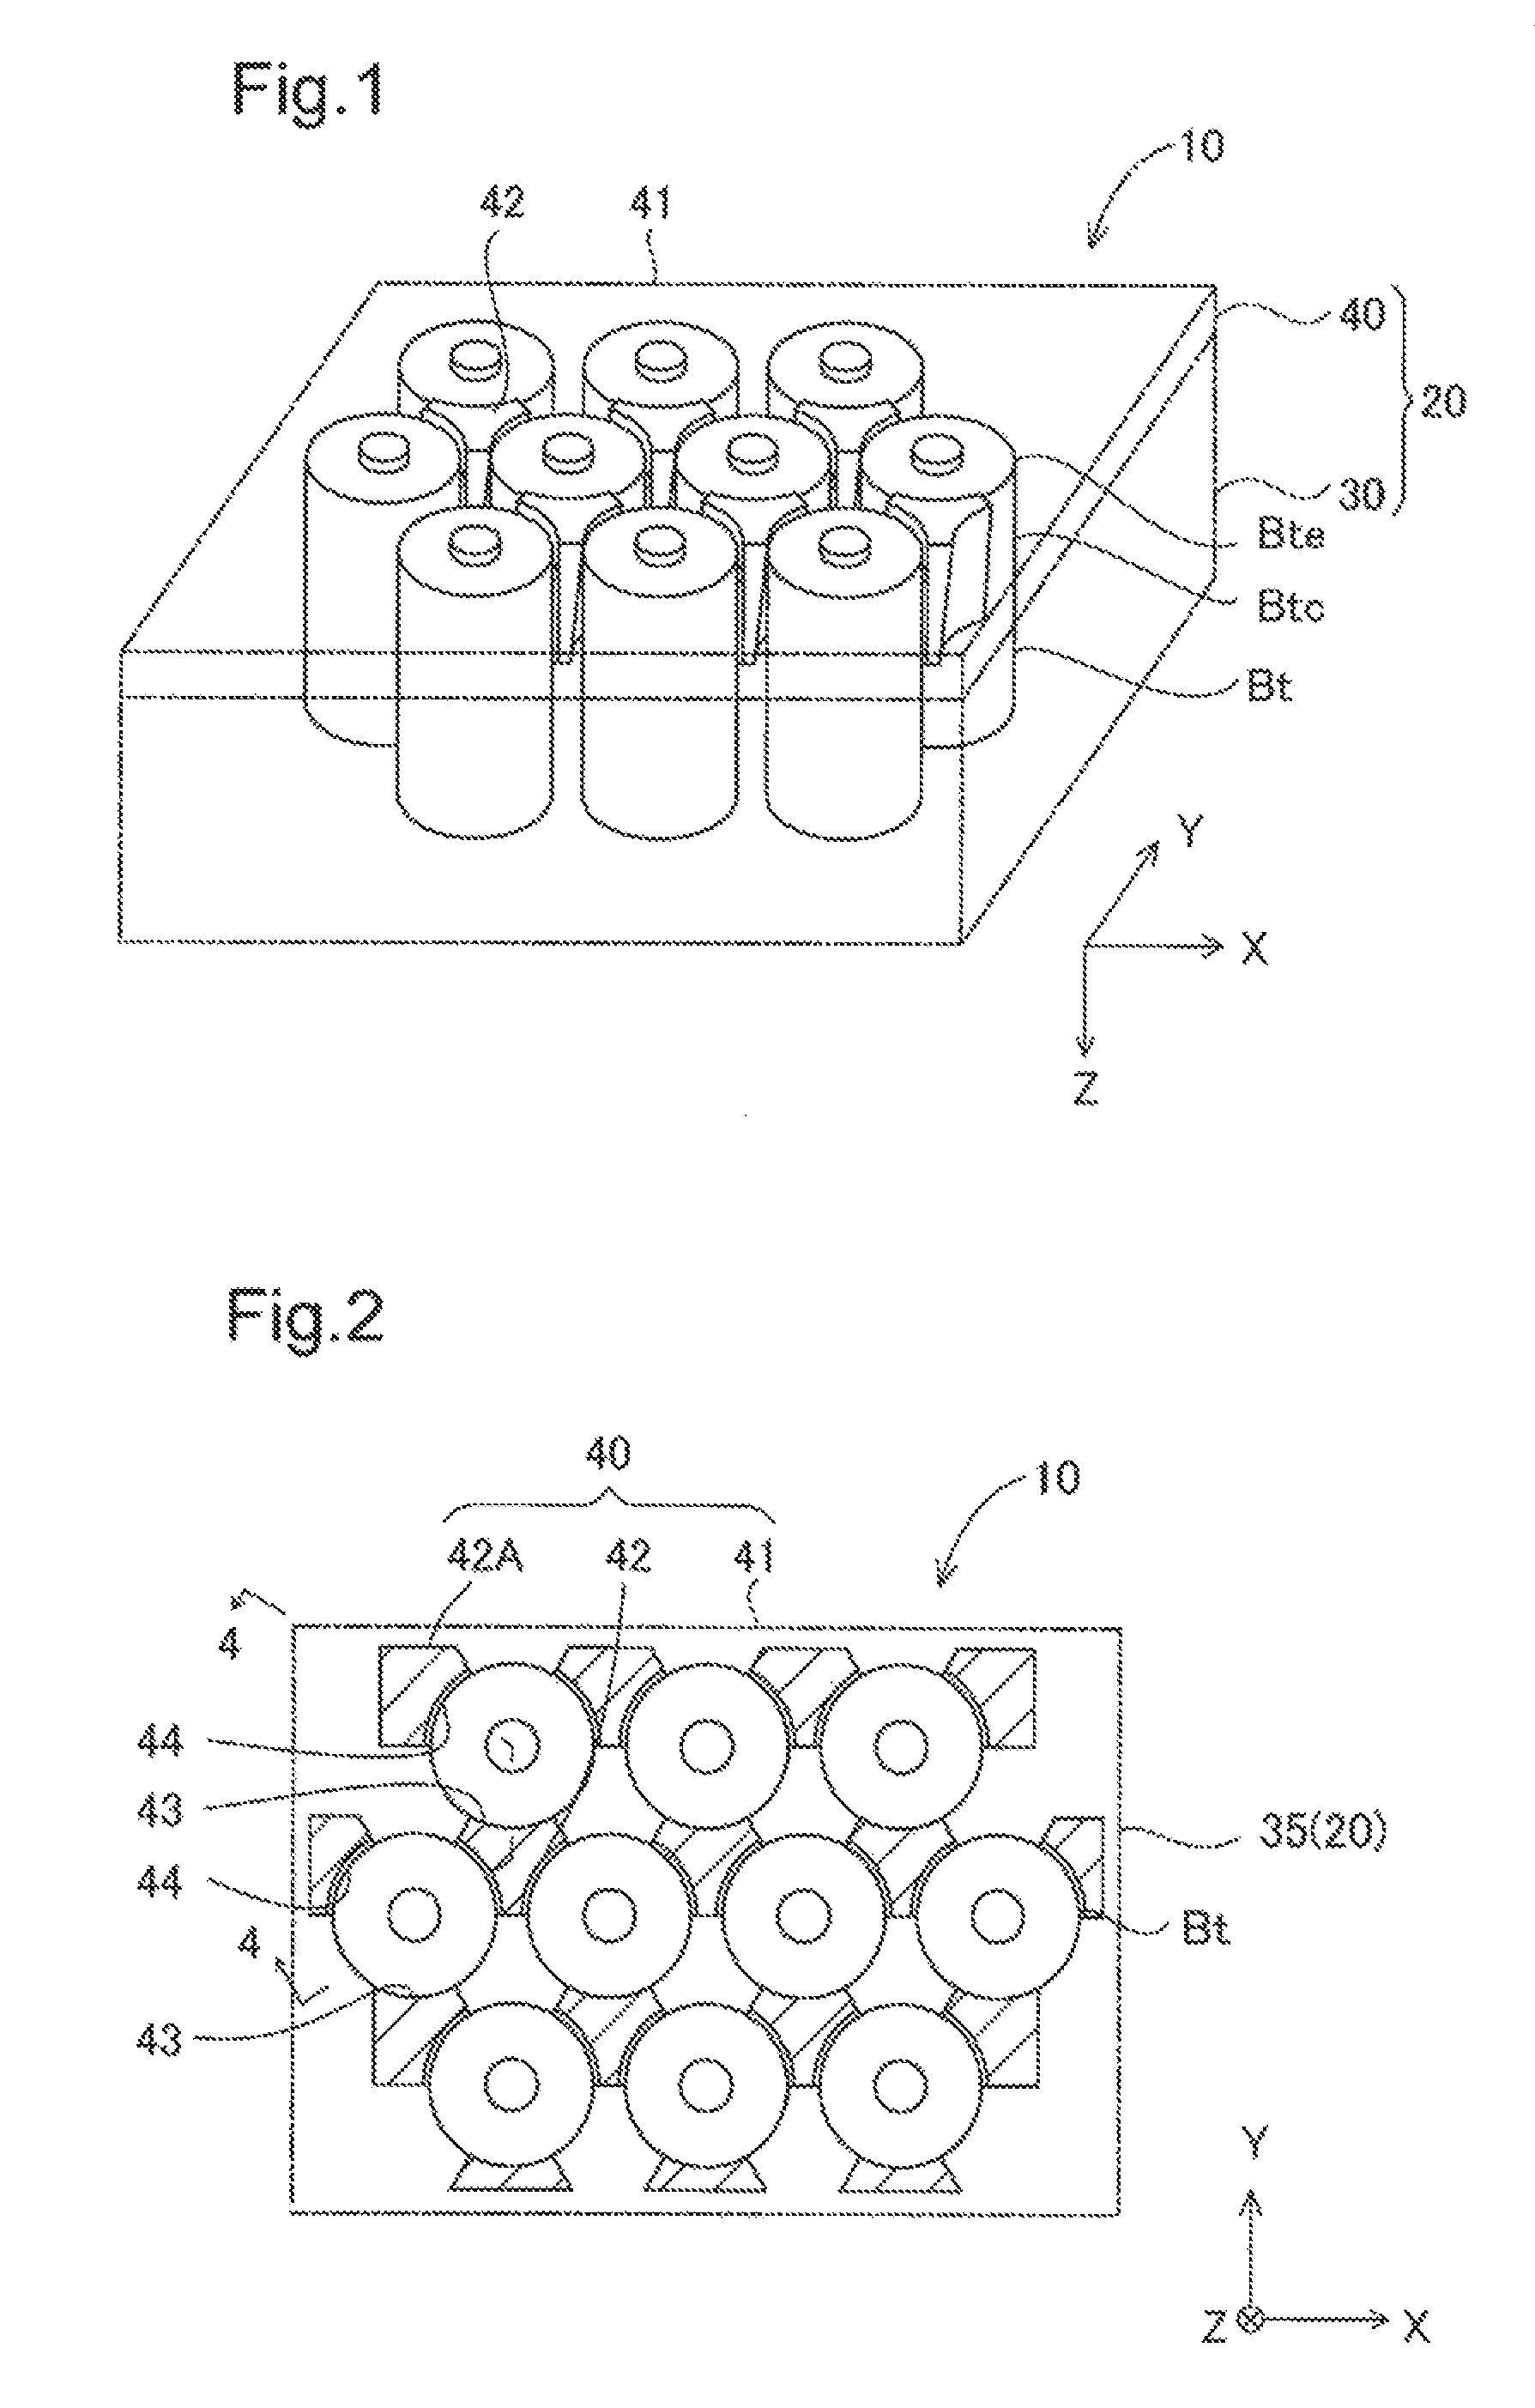 Battery device that holds batteries